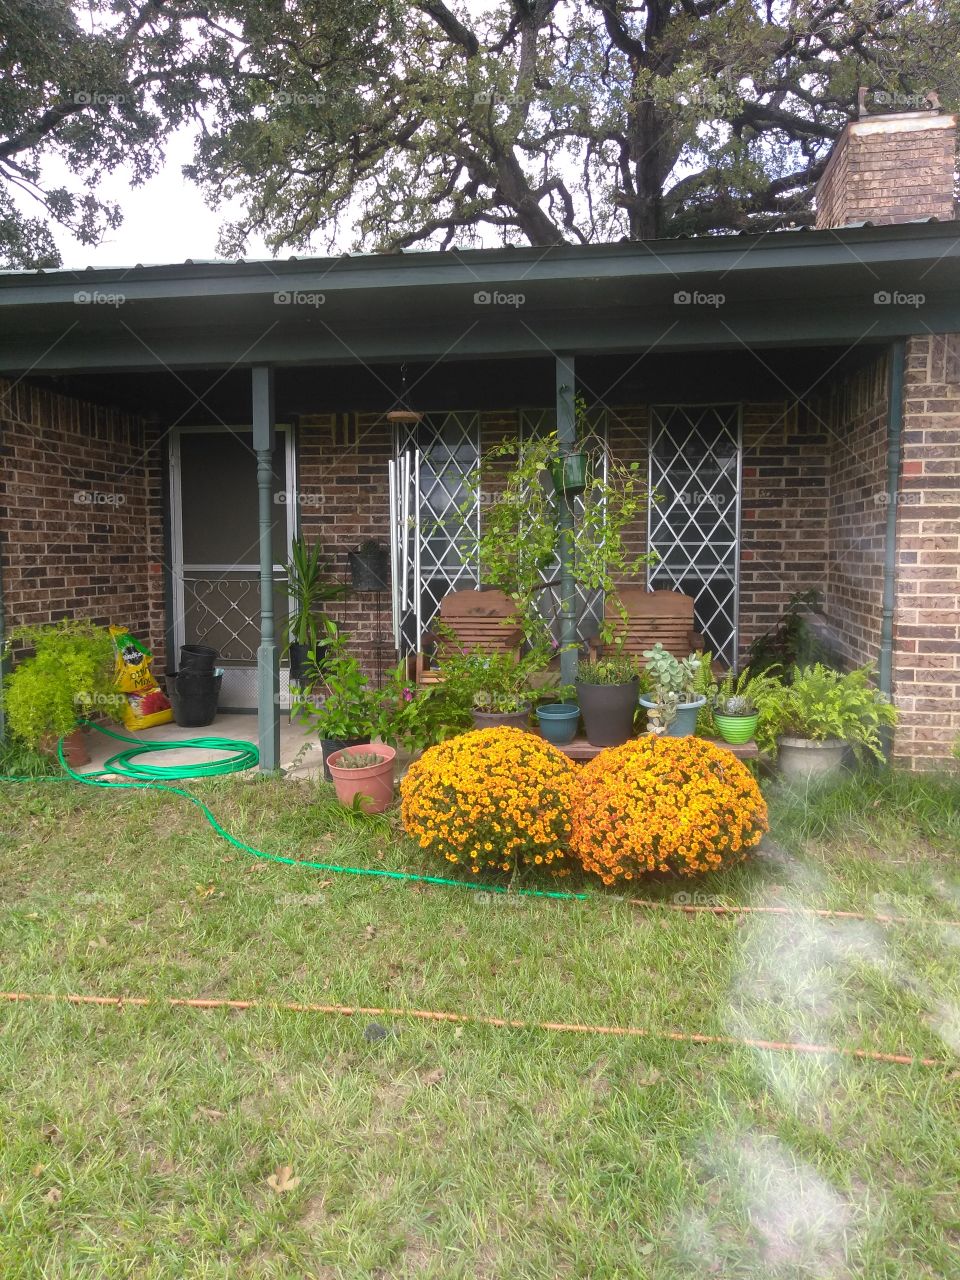 beautiful front porch along with the beautiful mum's and other plants